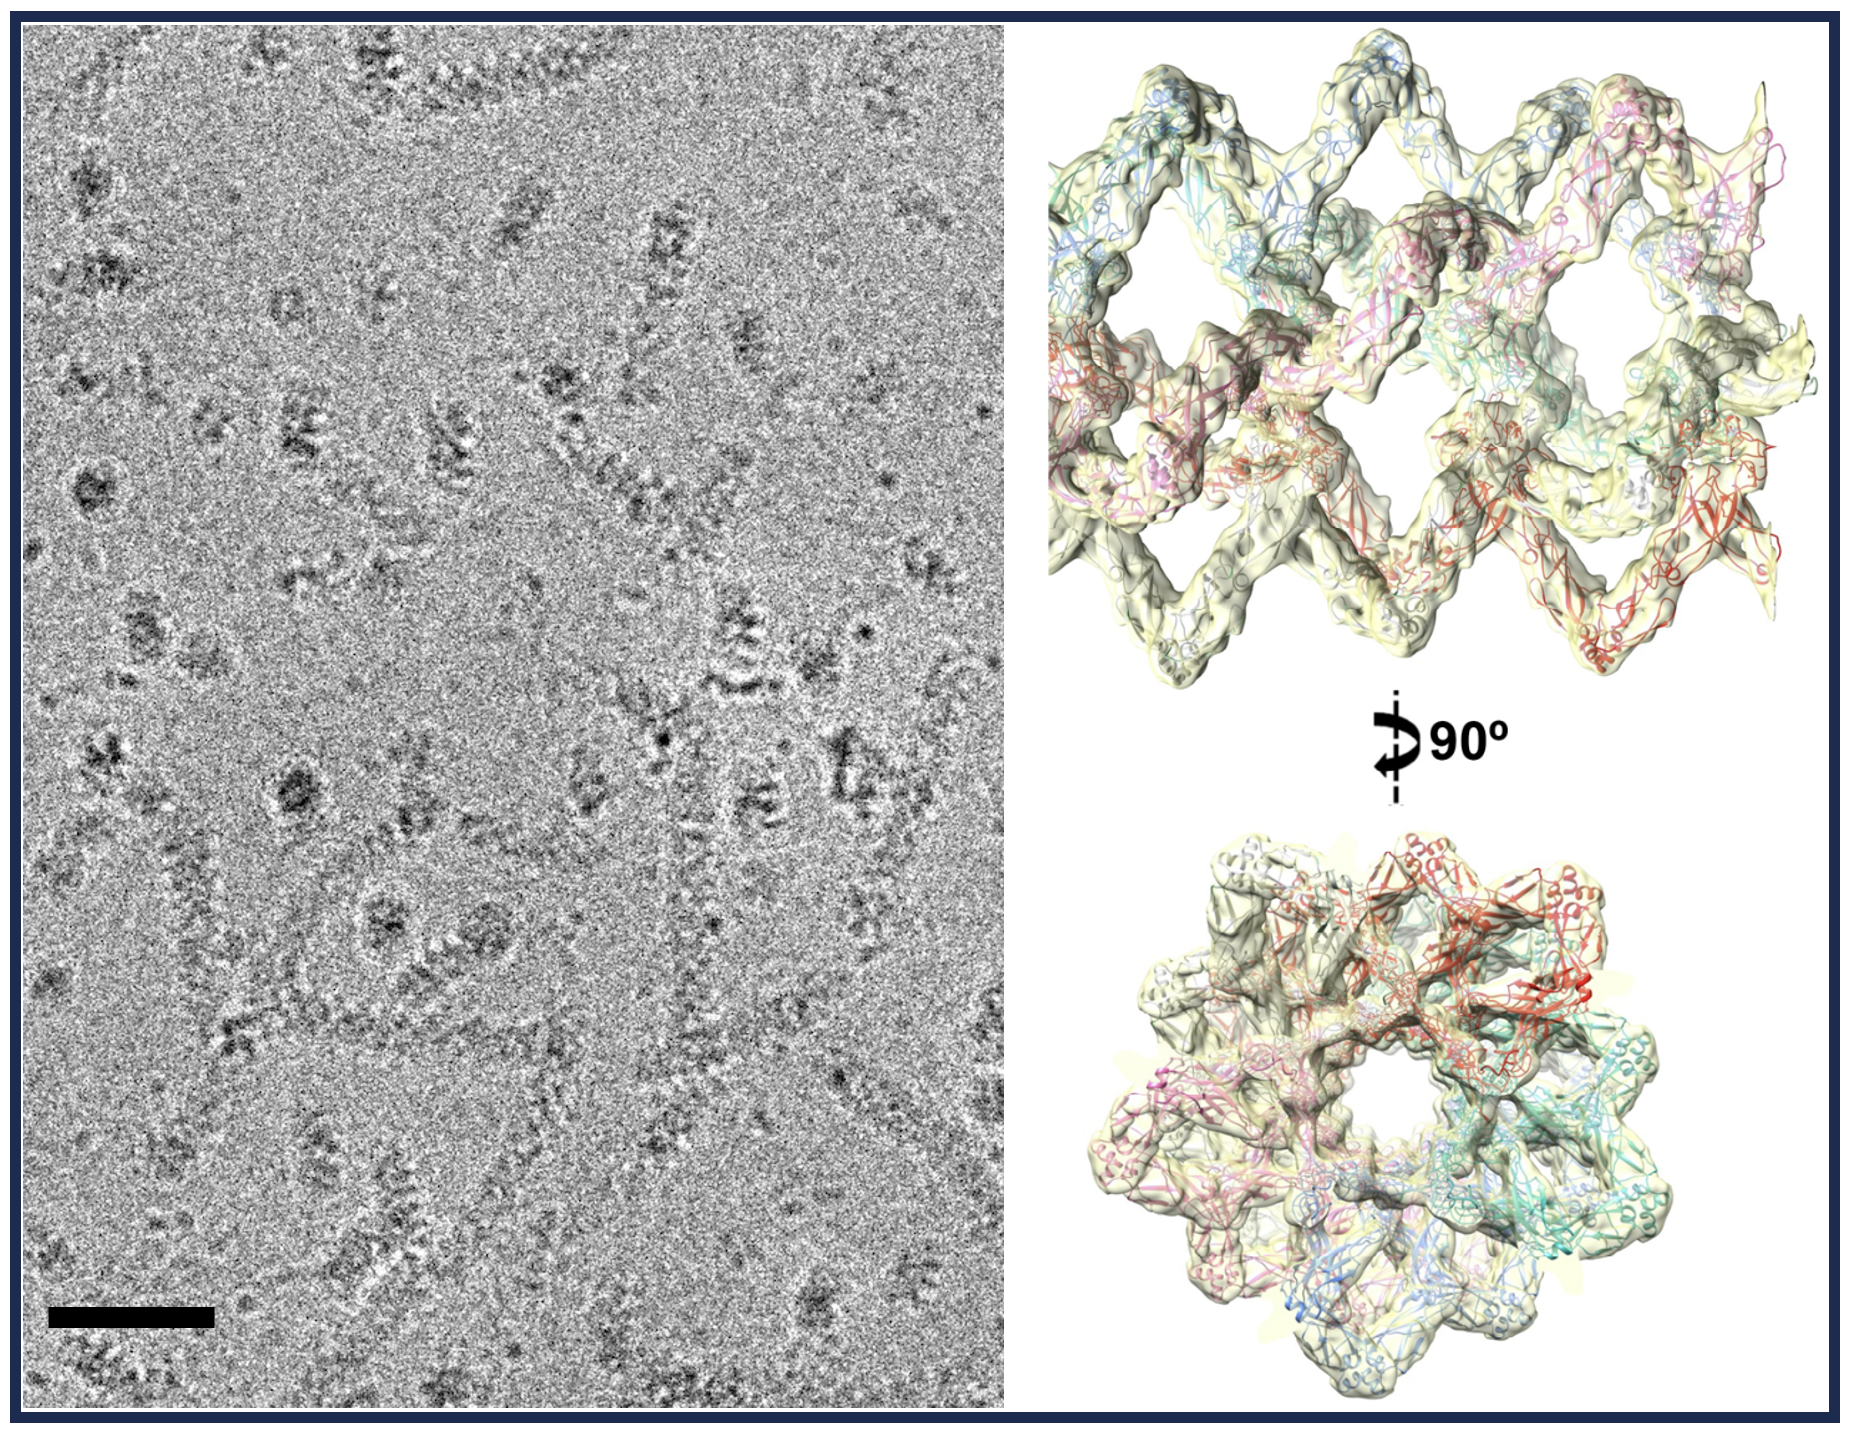 Architecture of DNAJA2 oligomers. Representative field of a CryoEM image of DNAJA2wt, a cochaperone of Hsp70, with a scale bar corresponding to 100 nm (left panel). The right panel displays side and top views of the atomic model of DNAJA2 fitted into the 3D reconstruction of the protein oligomer. The protein dimers align to form longitudinal filaments that interact laterally, resulting in the helical configuration. Each filament is depicted in distinct color.